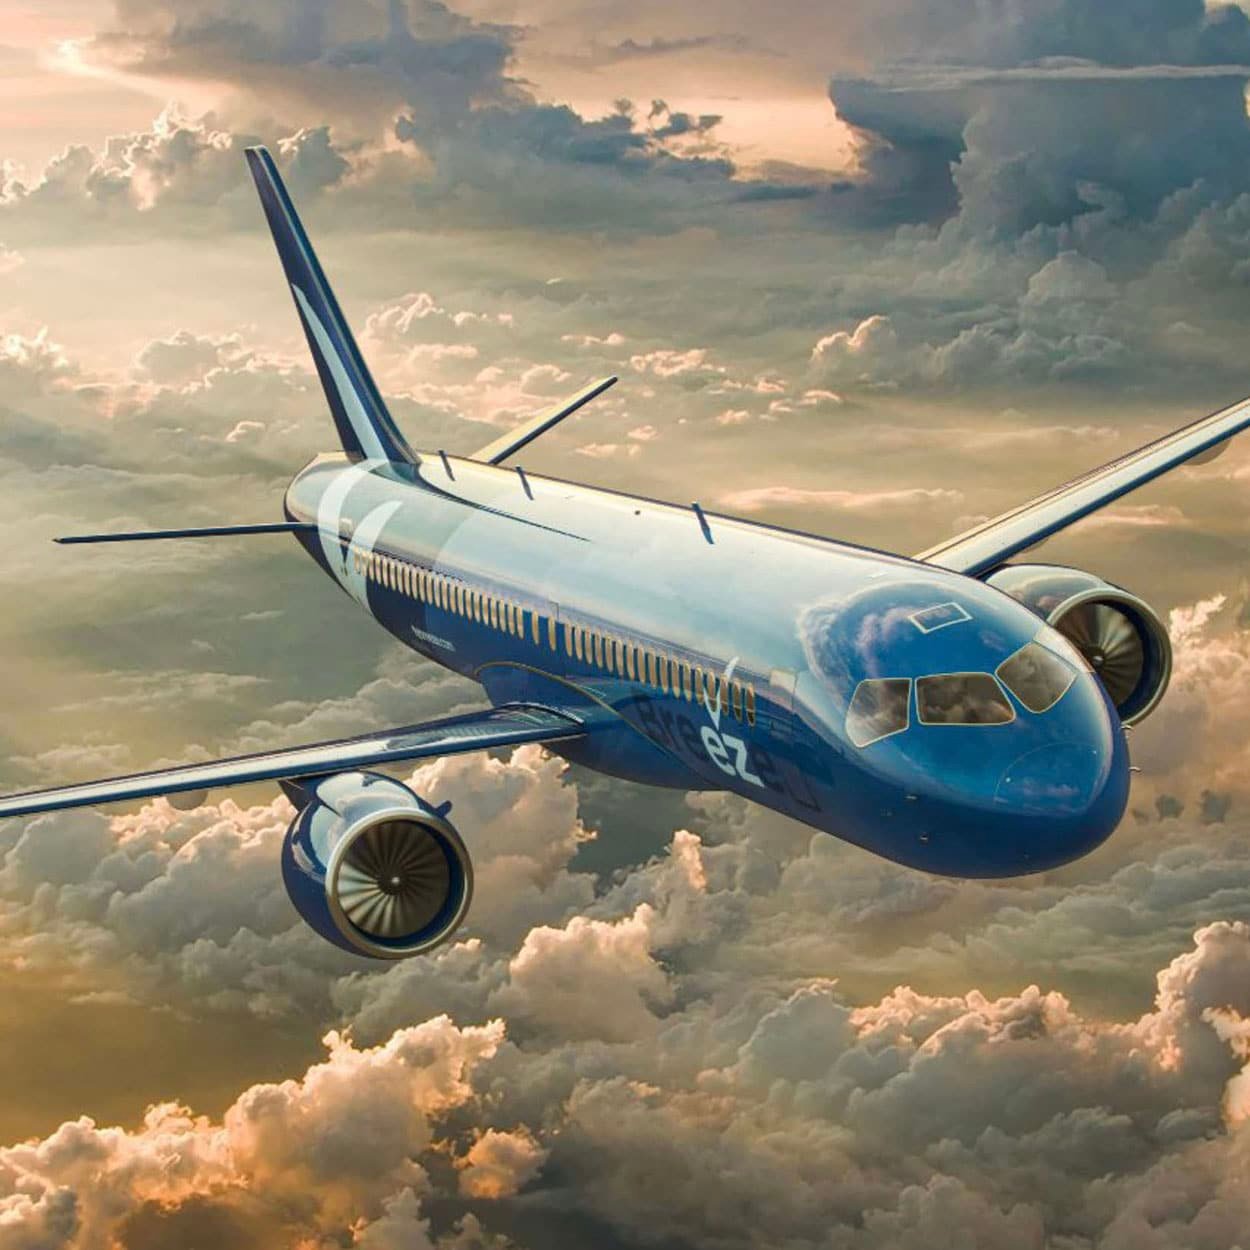 A blue commercial airplane is flying above the clouds during sunset, with a warm golden glow illuminating the sky. The airplane is in mid-flight, and its sleek design, twin engines, and visible winglets are prominent against the backdrop of dramatic clouds.